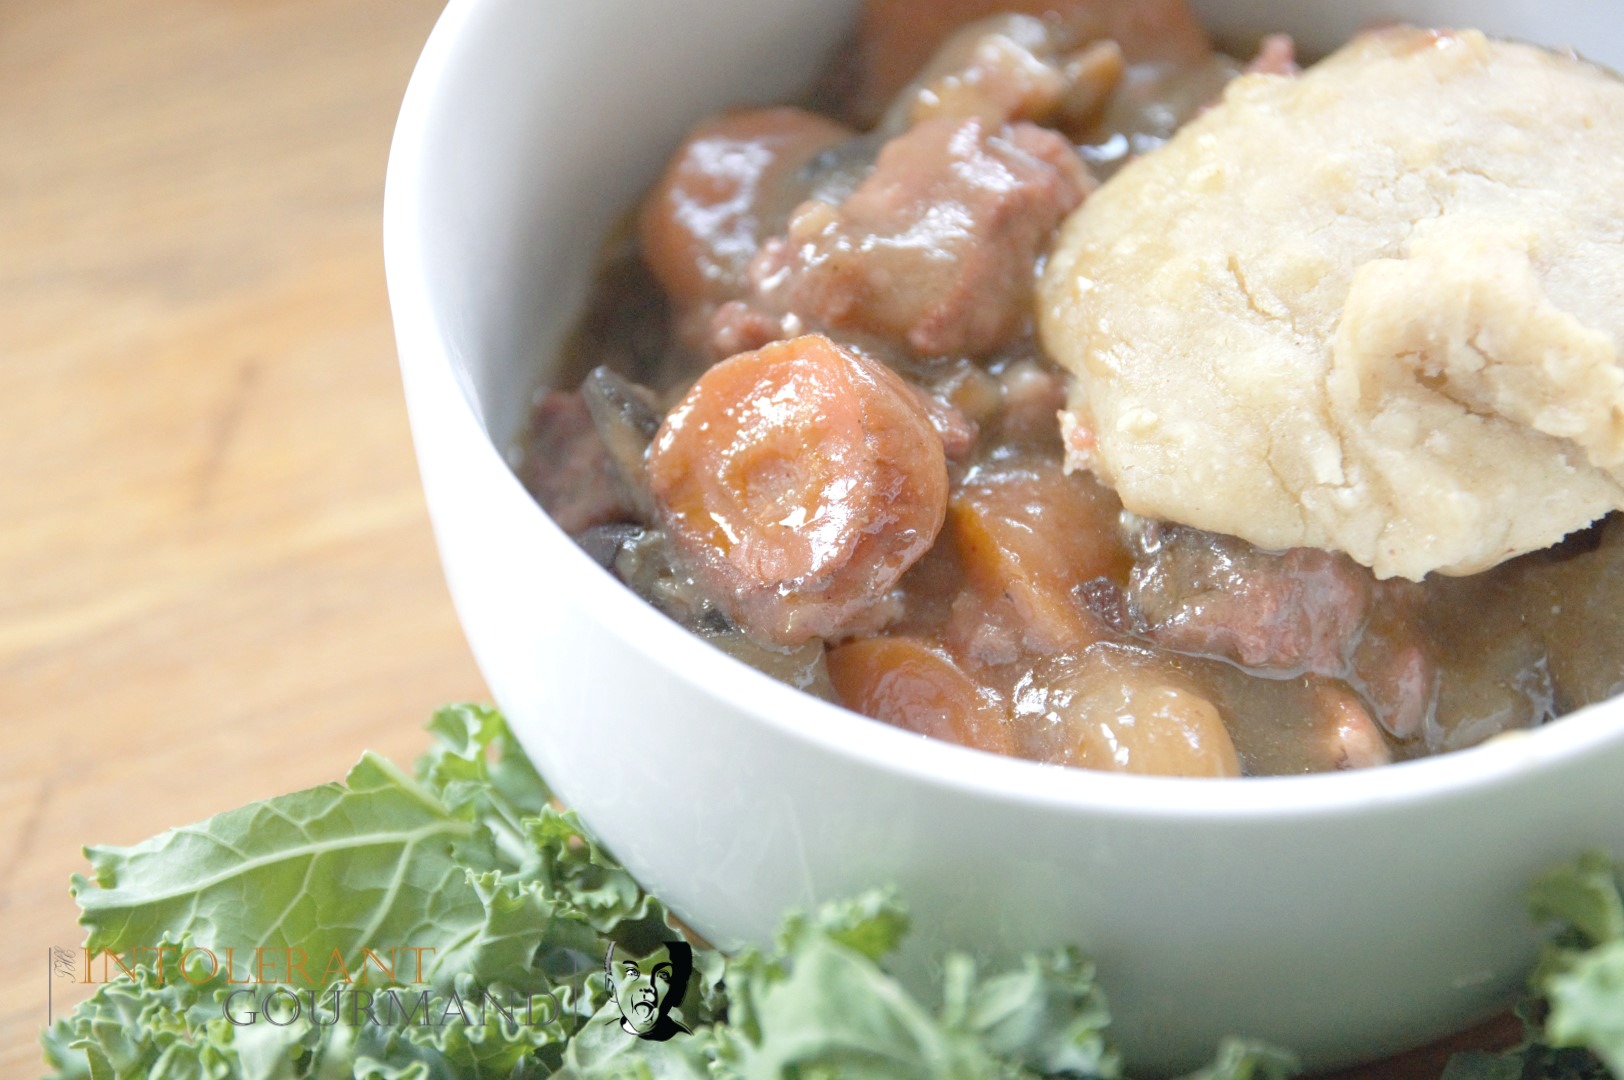 Beef Stew - a comforting, tasty and gluten-free dish, full of flavour! The perfect family meal that everyone will love! www.intolerantgourmand.com